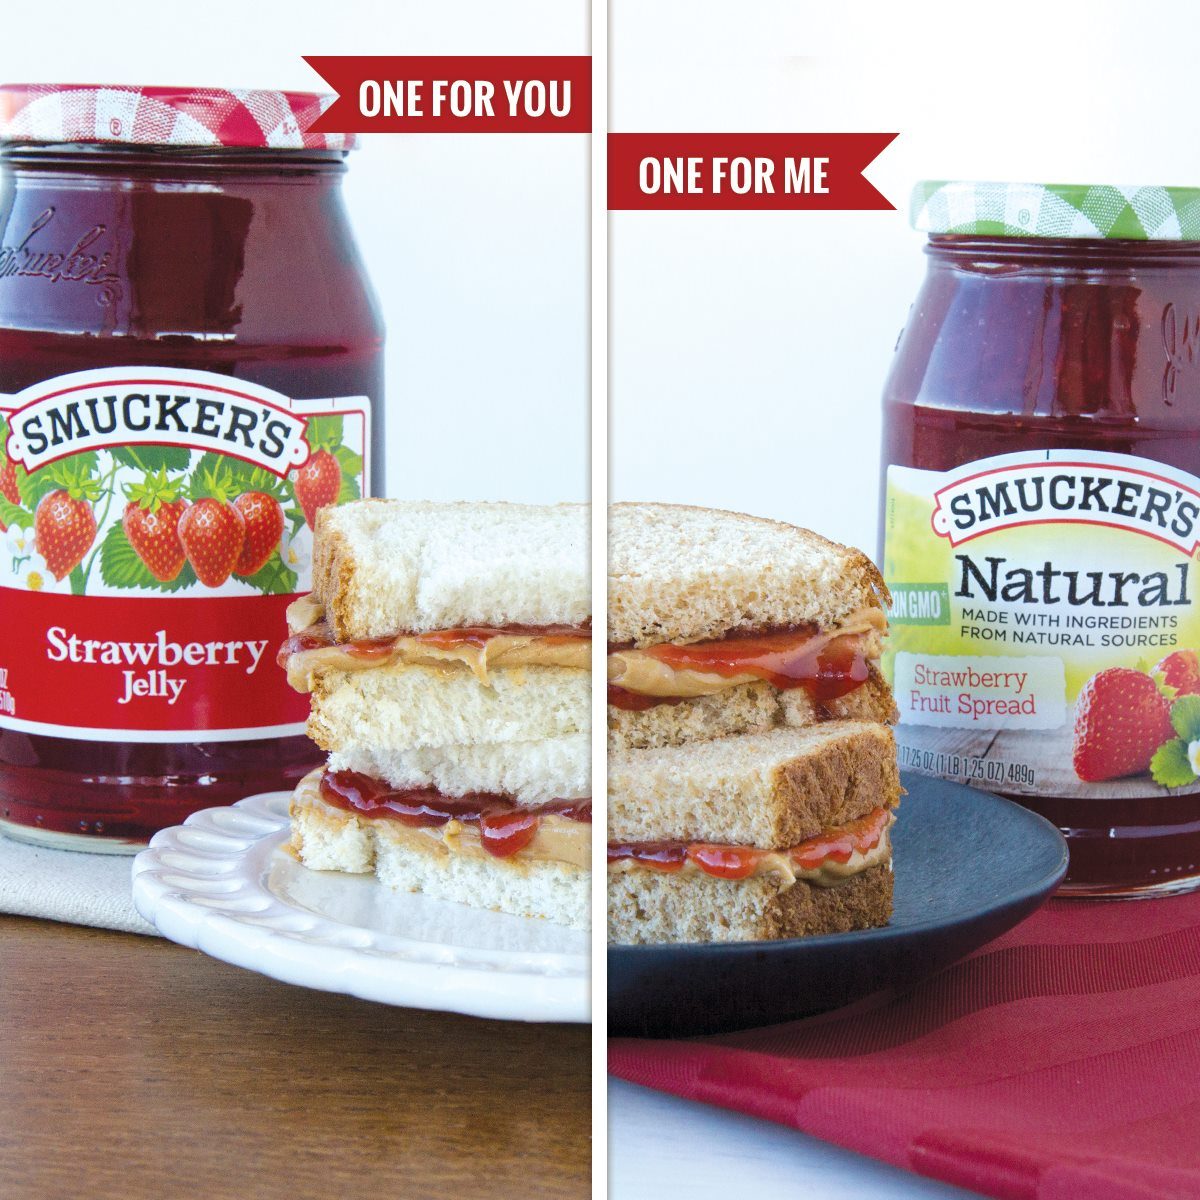 <p><strong><a class="SWhtmlLink" href="https://www.smuckers.com" rel="noopener">Smuckers</a>, Orrville</strong></p> <p>You might love Smuckers for their perfectly sweetened preserves, but they do so much more than that. The J.M. Smucker Company also owns Jif peanut butter, Pillsbury and Folger's—everything you need to start your day out right!</p>